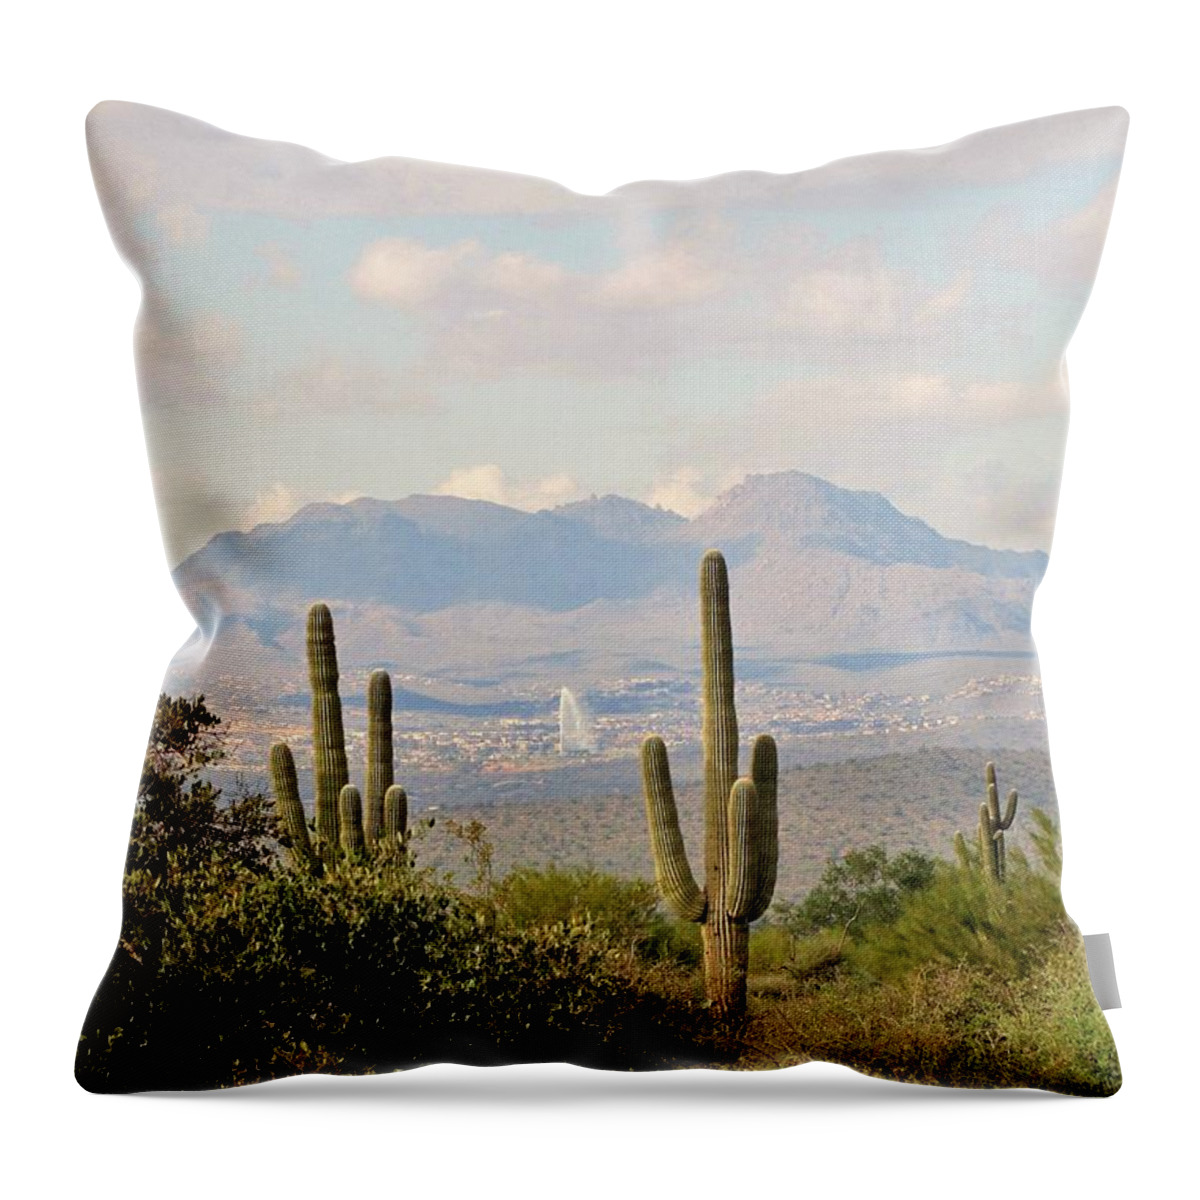 Fountain Hills Throw Pillow featuring the photograph Fountain Hills Arizona by Marilyn Smith